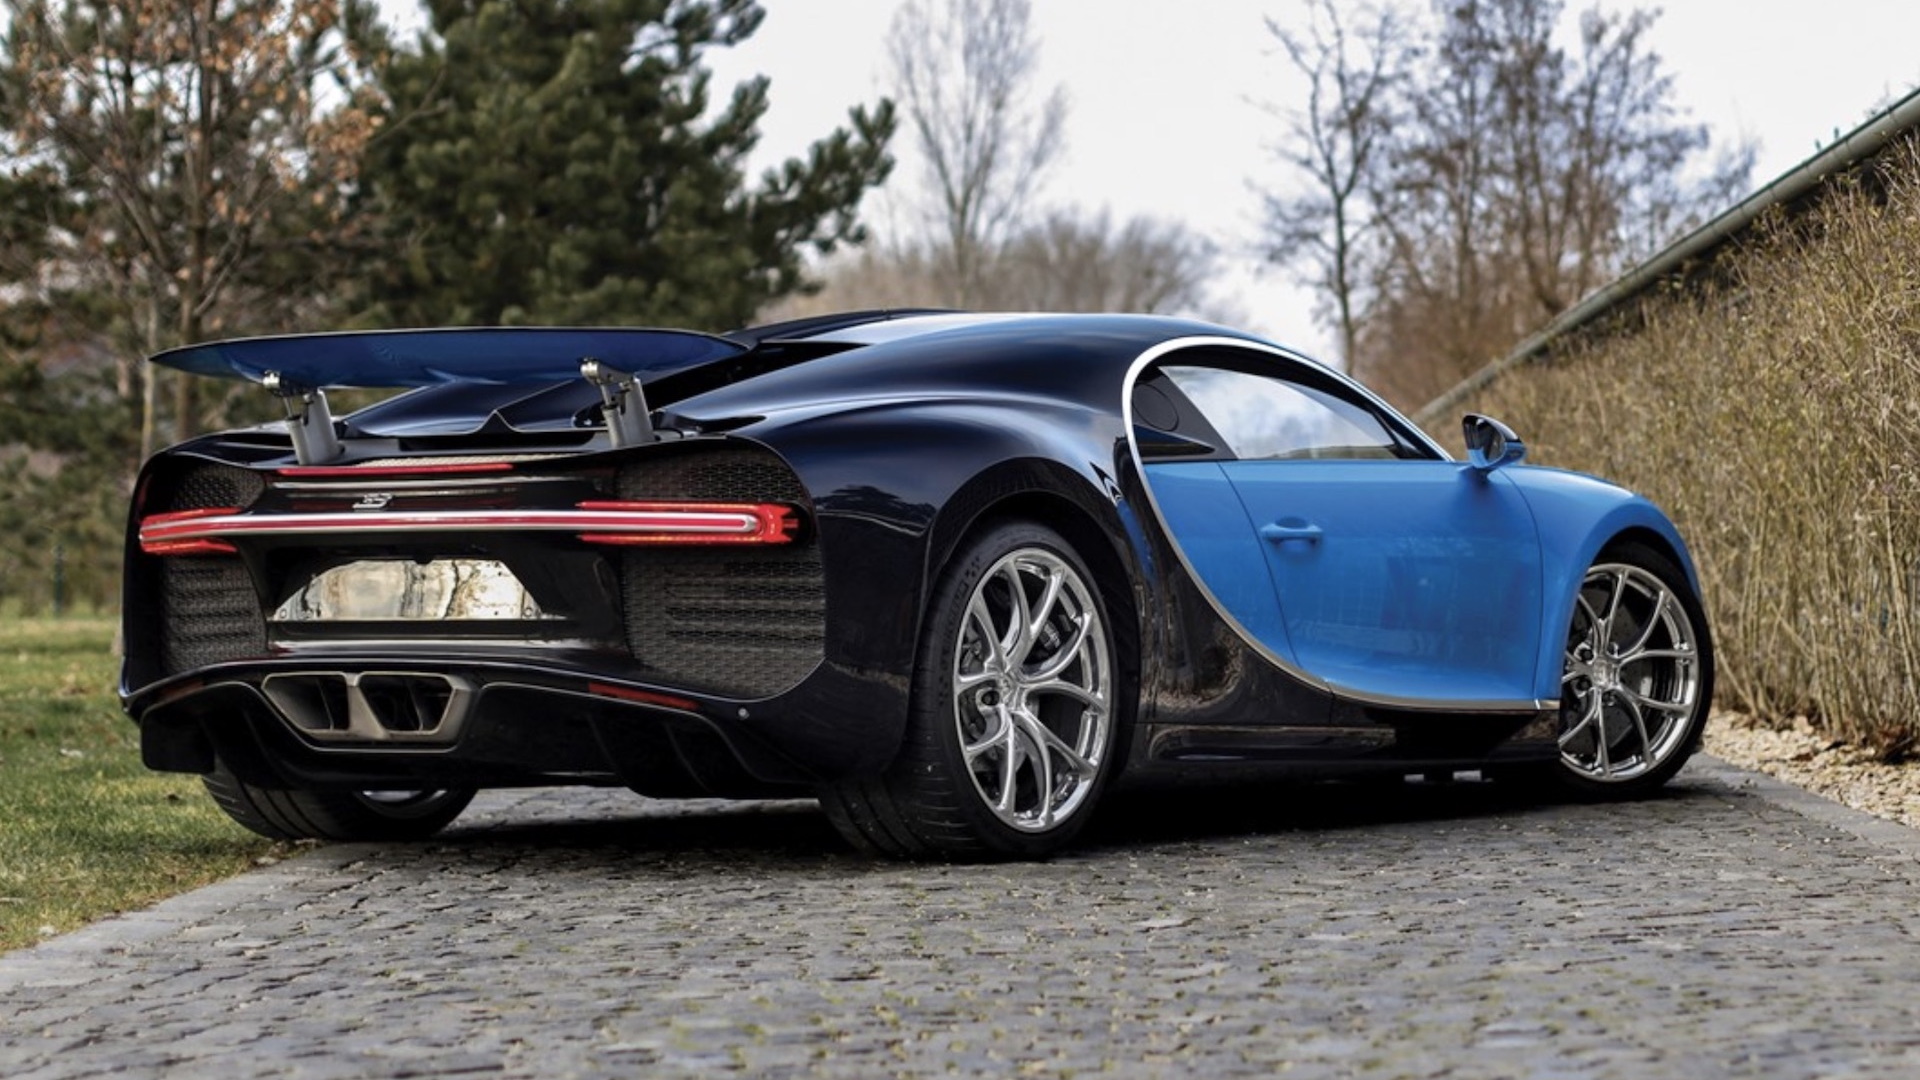 Bugatti Chiron heading to RM Sotheby's auction